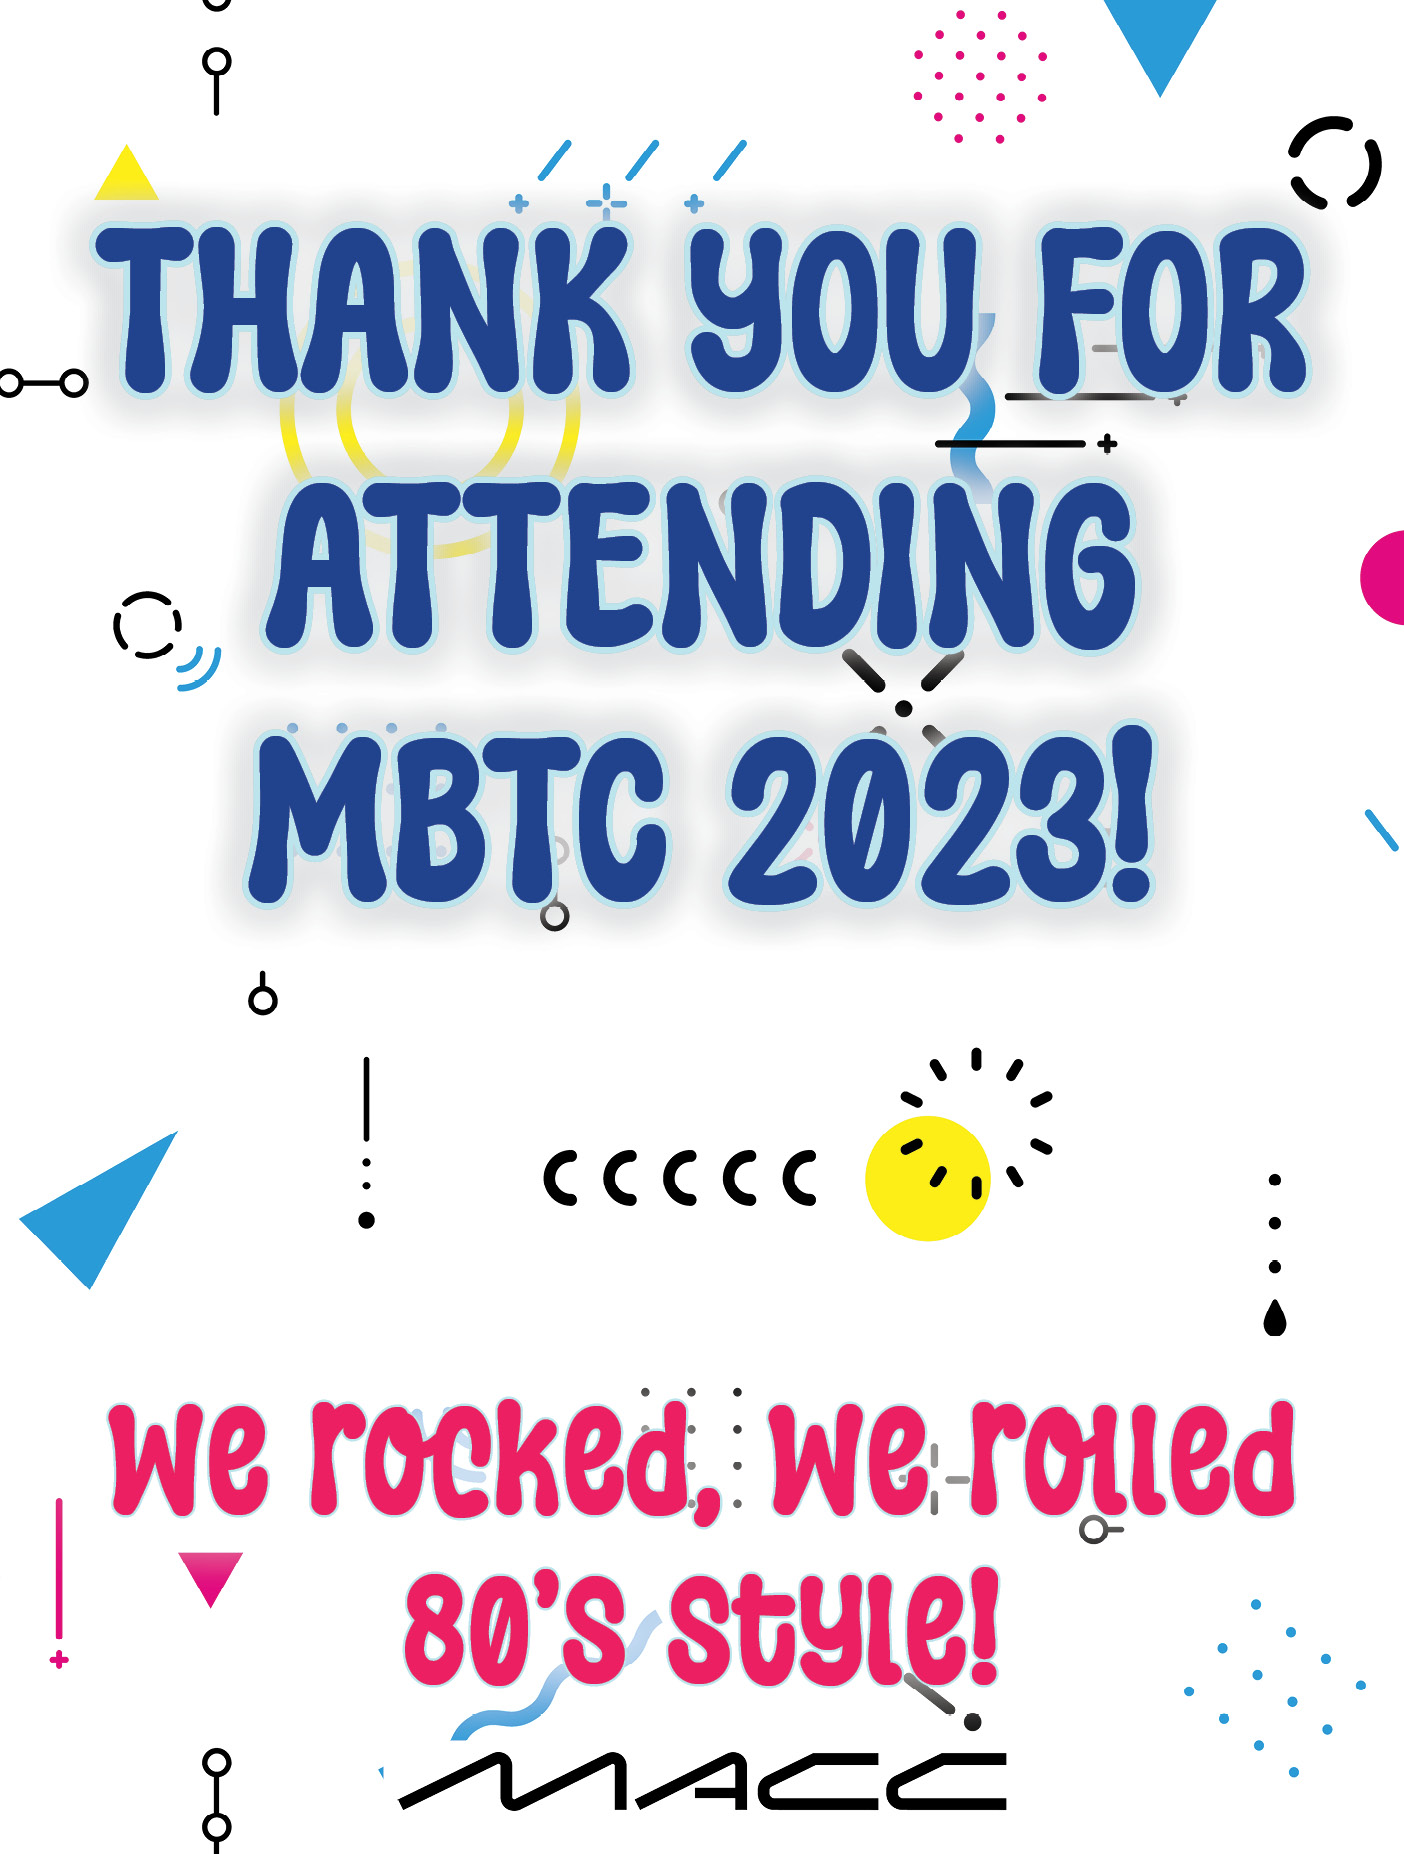 Save the date for MBTC 2023